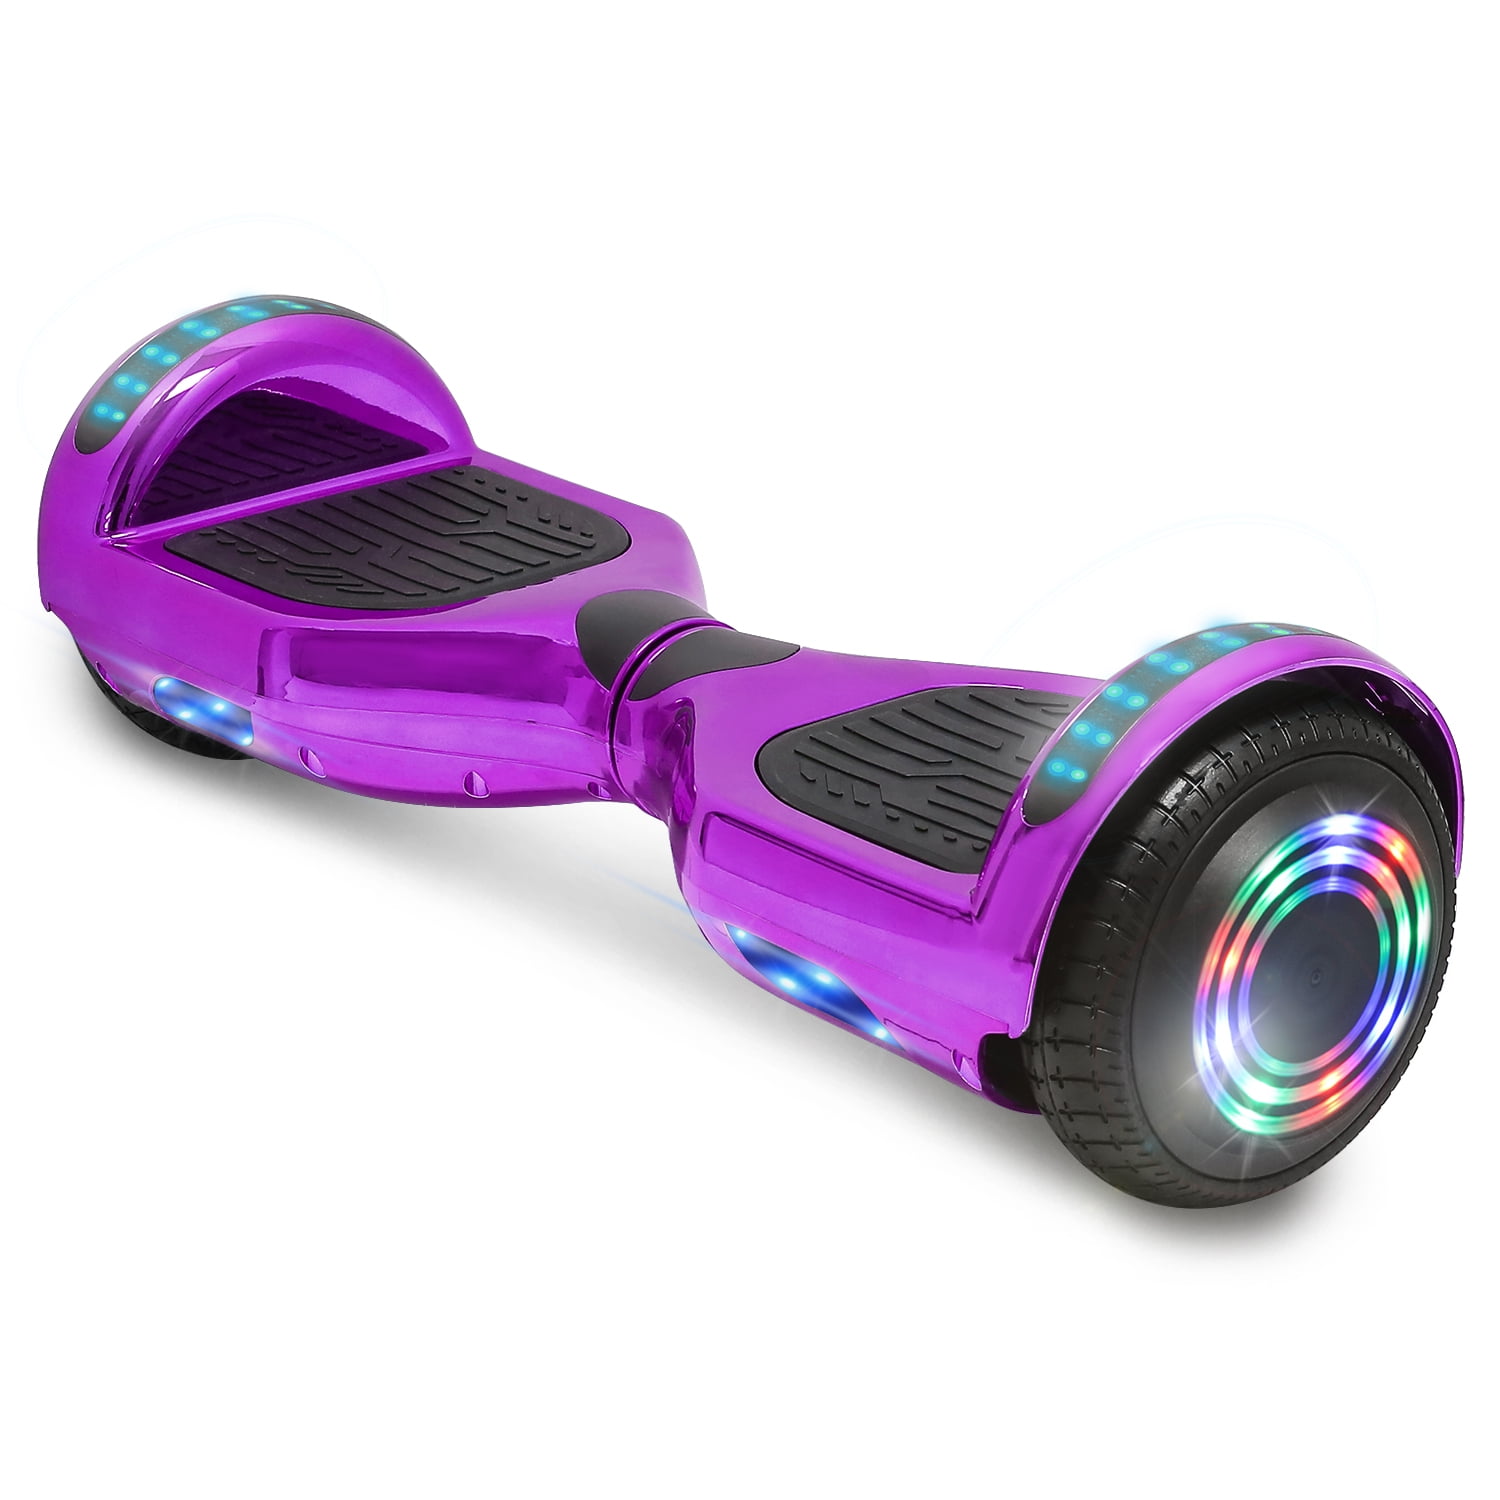 TPS 6.5 Hoverboard Electric Self Balancing Scooter with Wireless Speaker and LED Lights for Kids and Adults UL2272 Safety Certified 